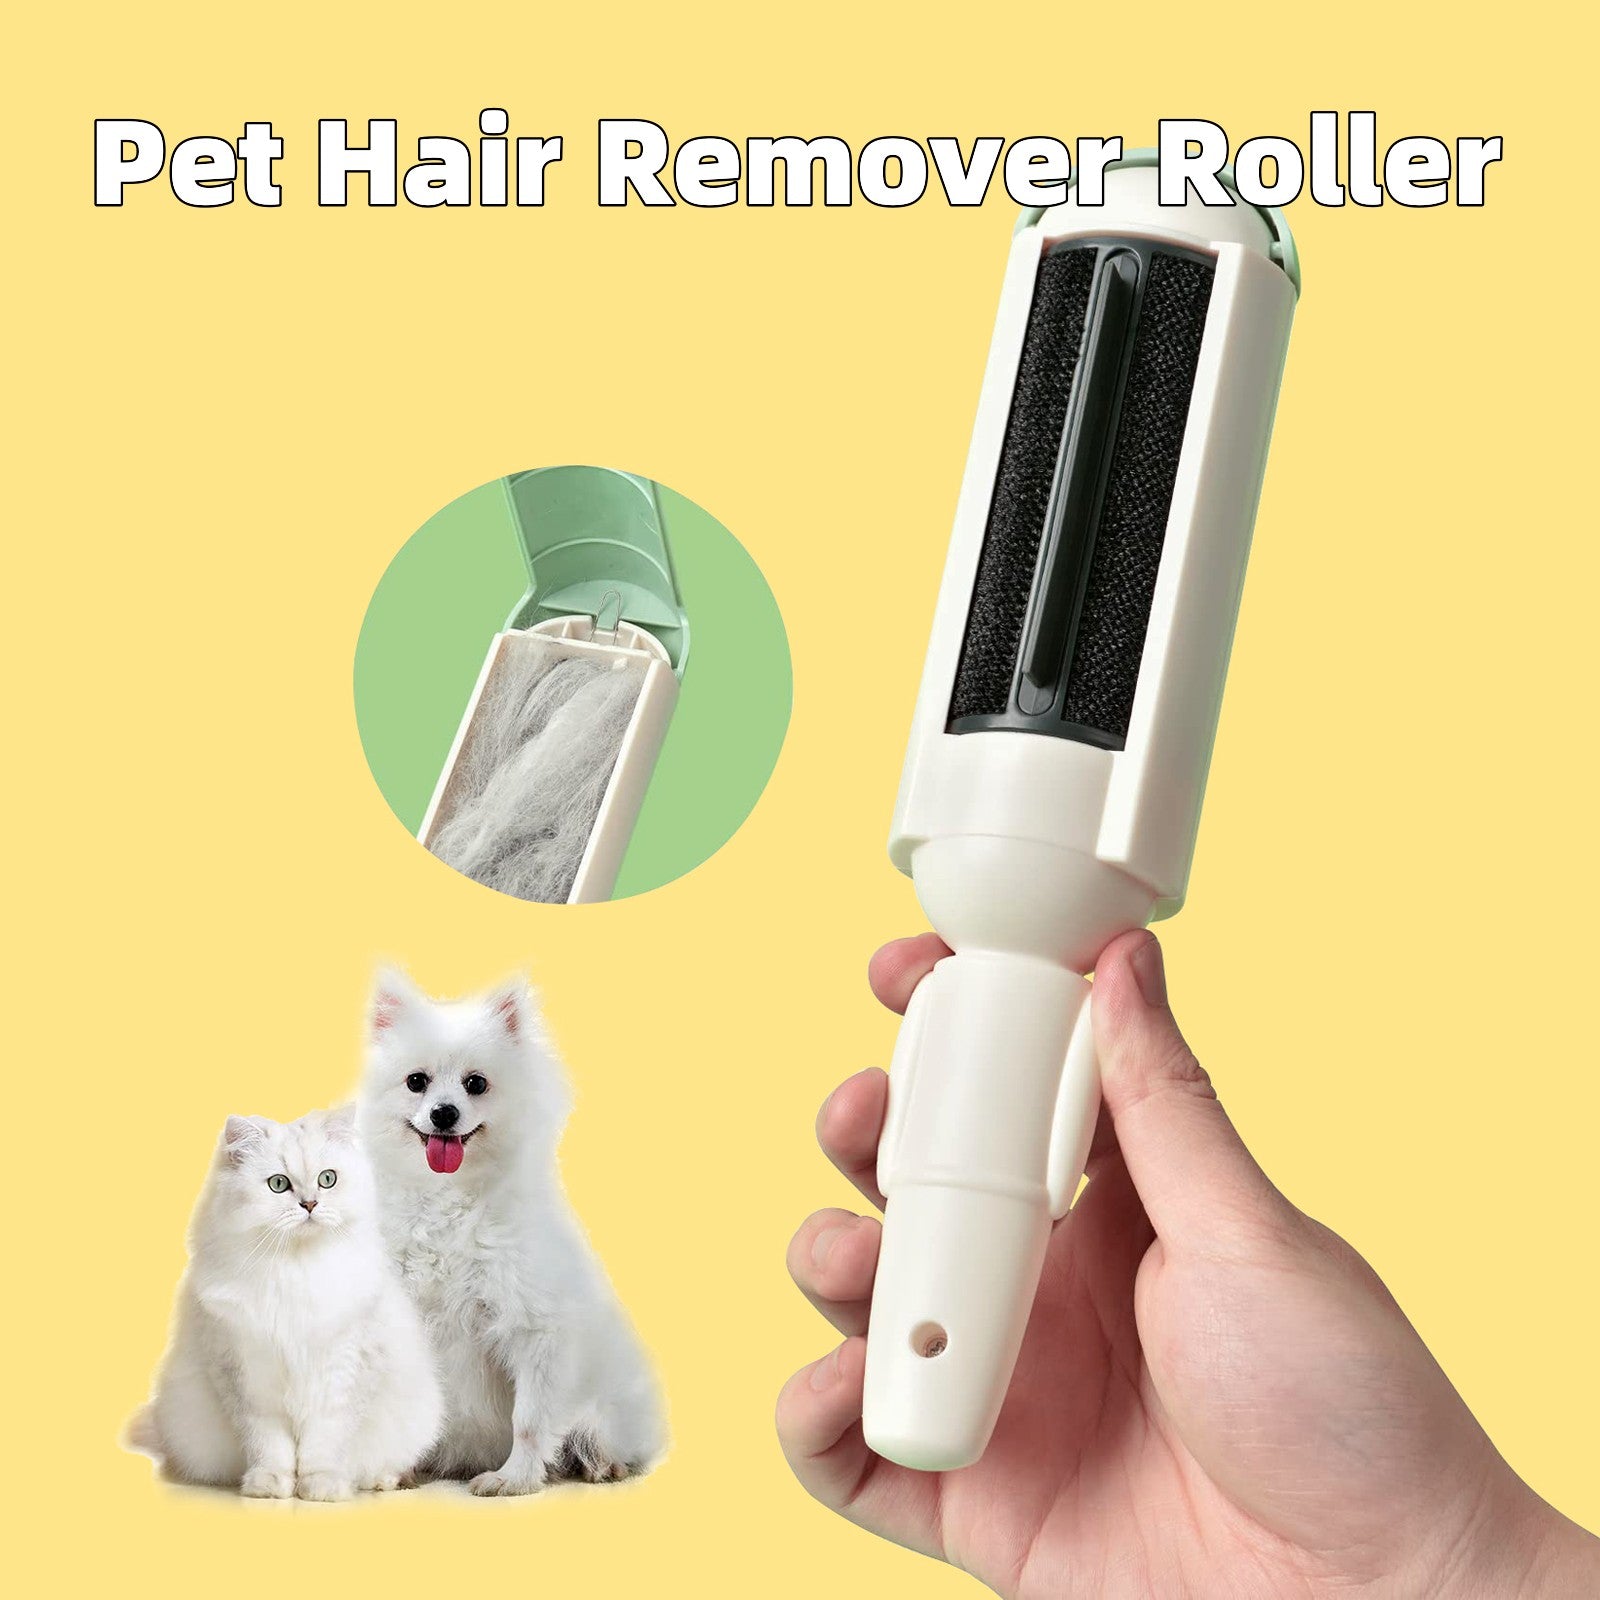 Pet Hair Remover Roller - Portable Lint Roller with Self-Cleaning Base